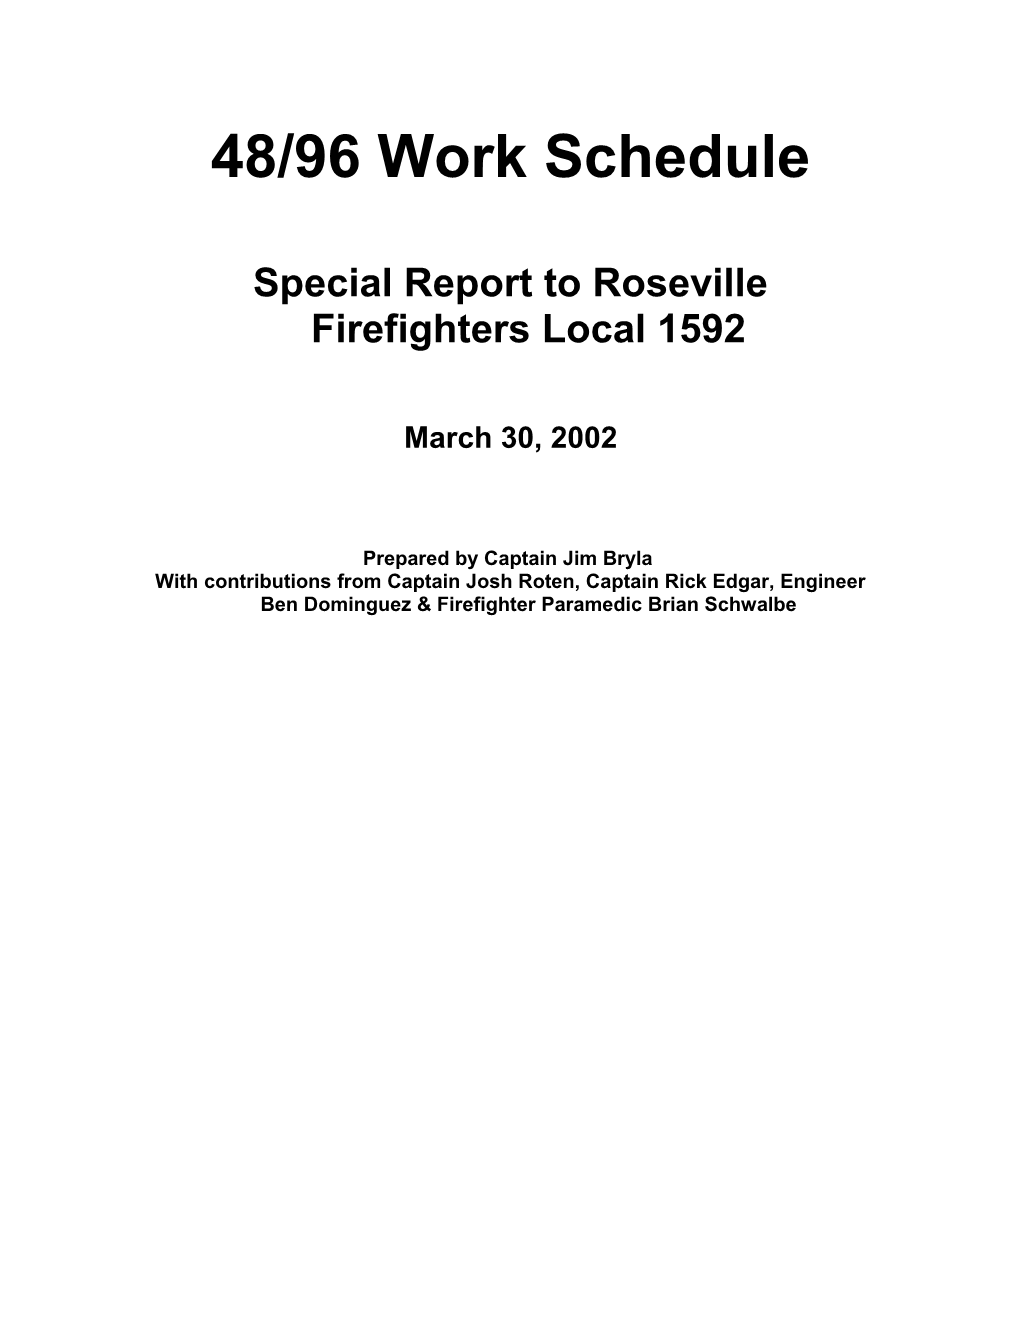 Special Report to Roseville Firefighters Local 1592